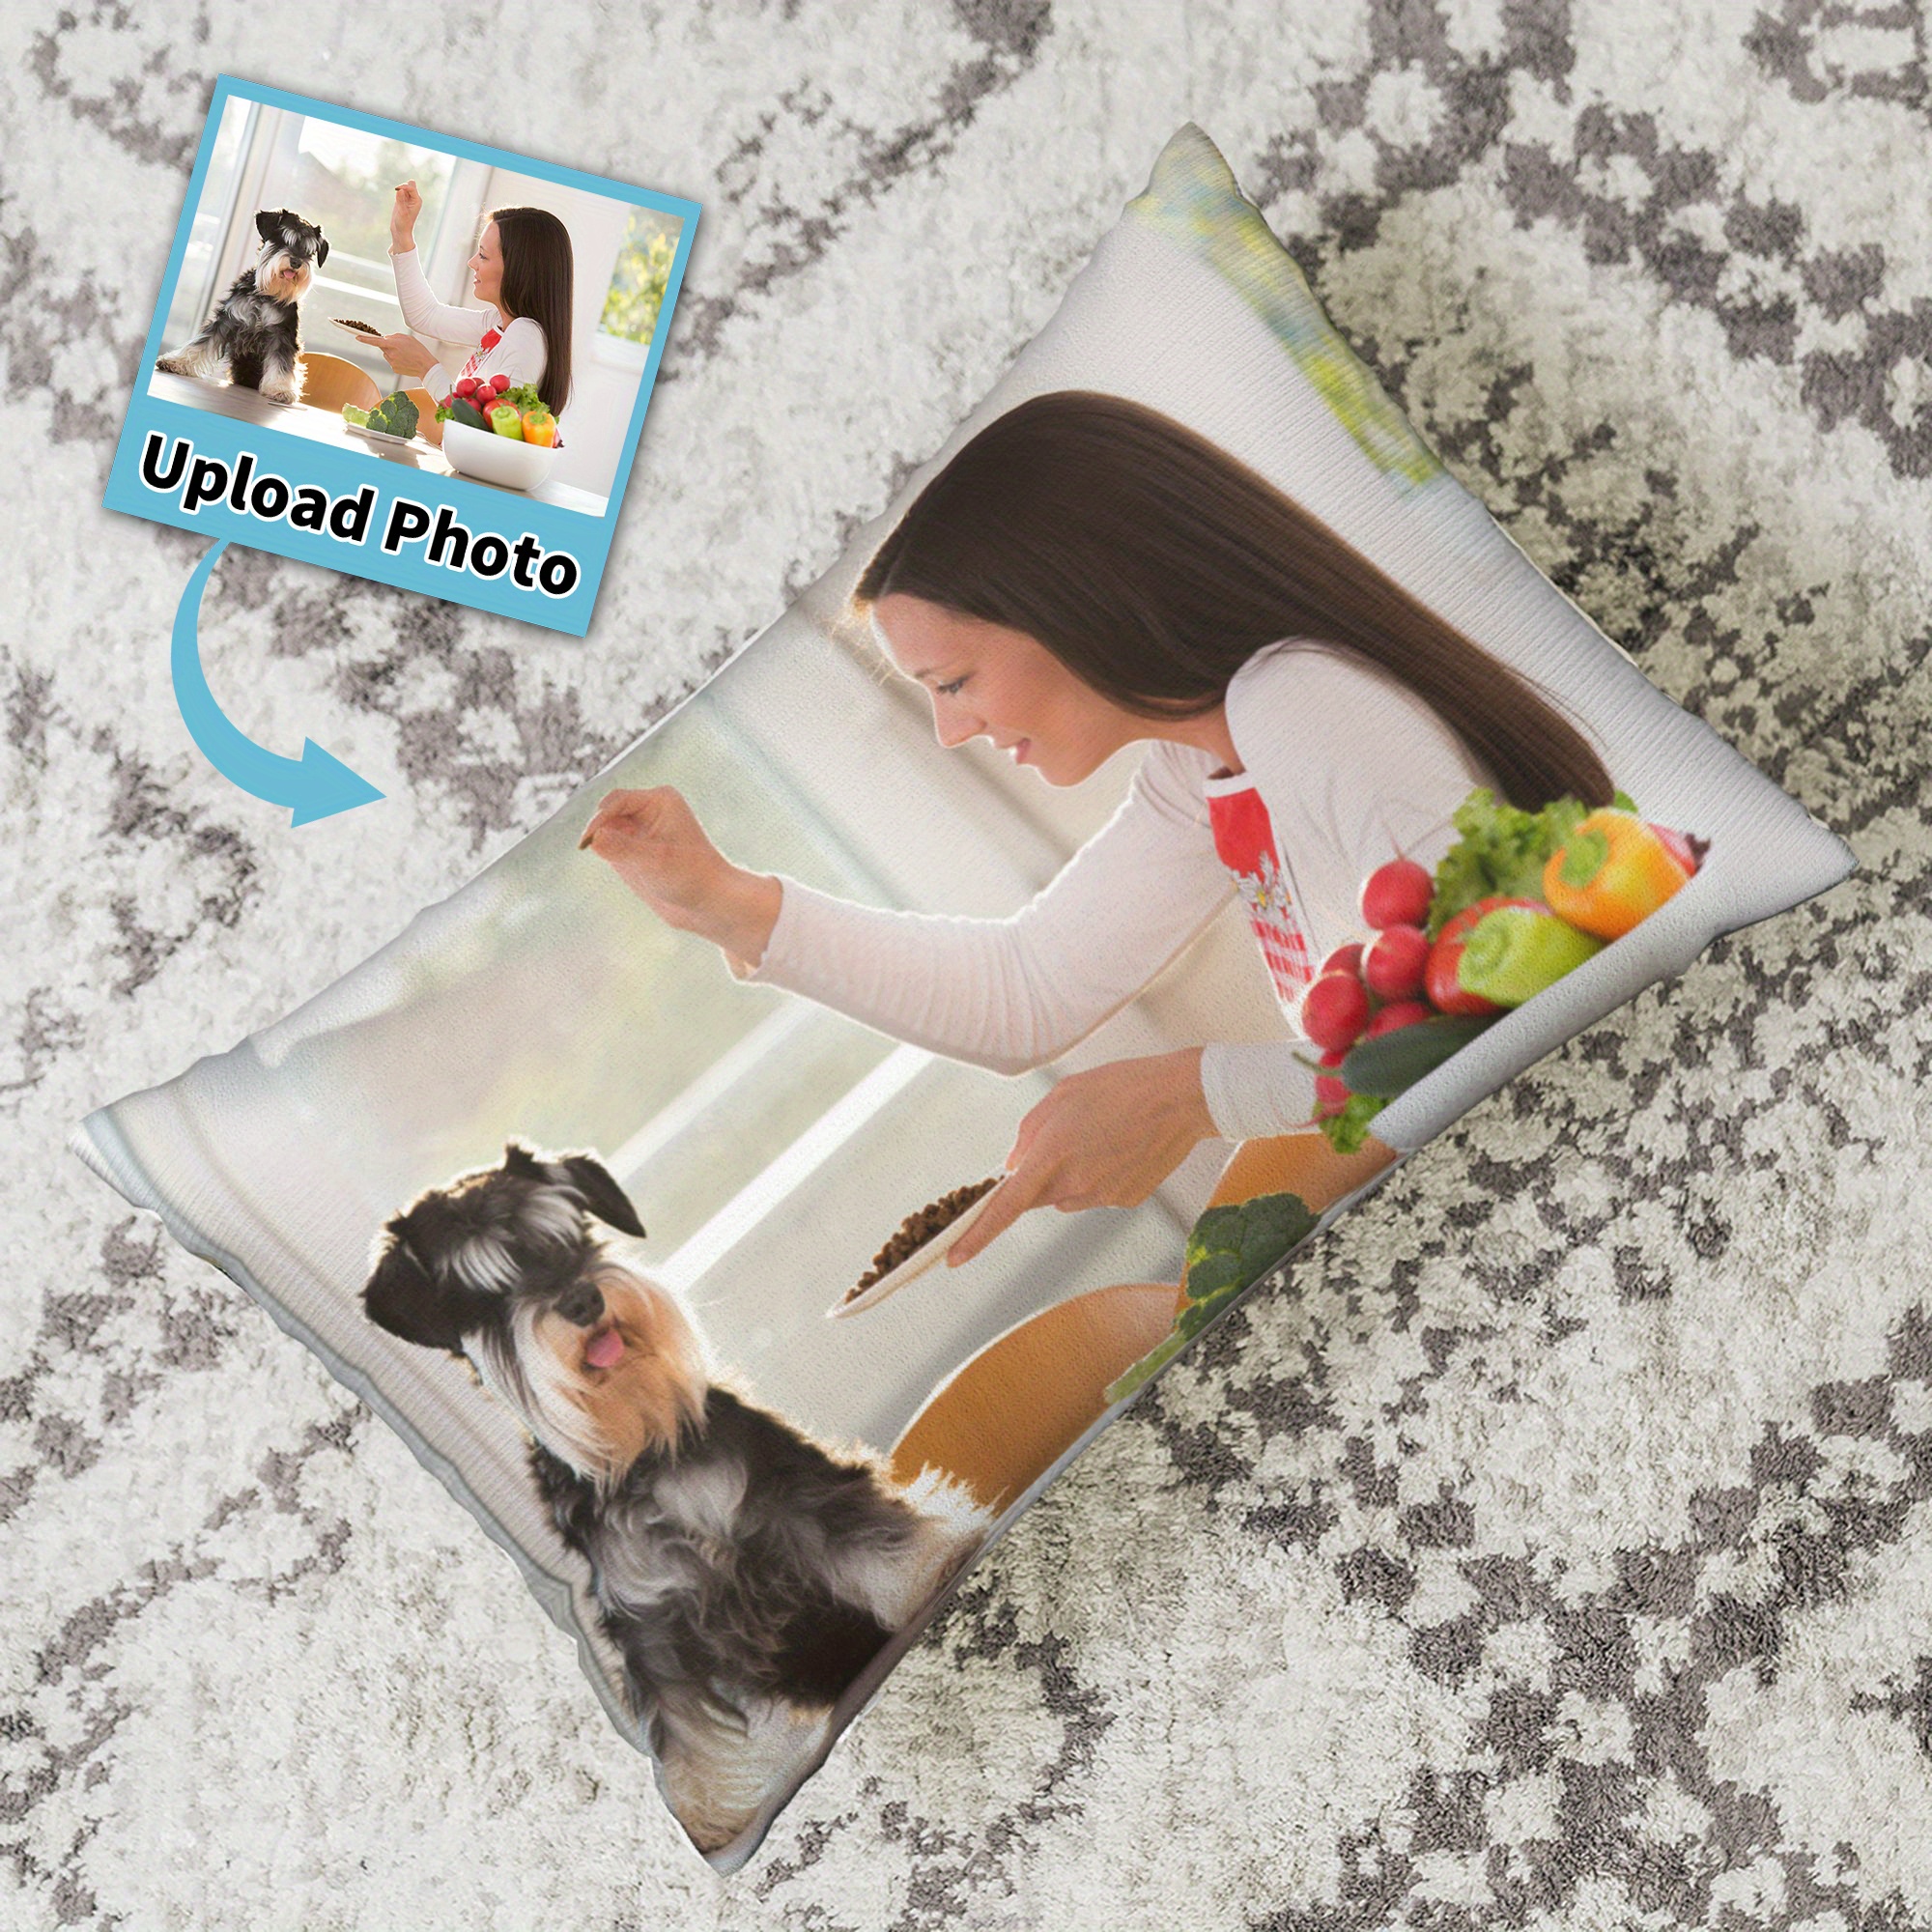 

Personalized Photo Pillowcase - Double-sided, Custom Print Design, Soft Polyester, Zip Closure - Perfect For Mother's Day, Valentine's, Graduation & More - 20"x30" Or 16"x24" Sizes Available